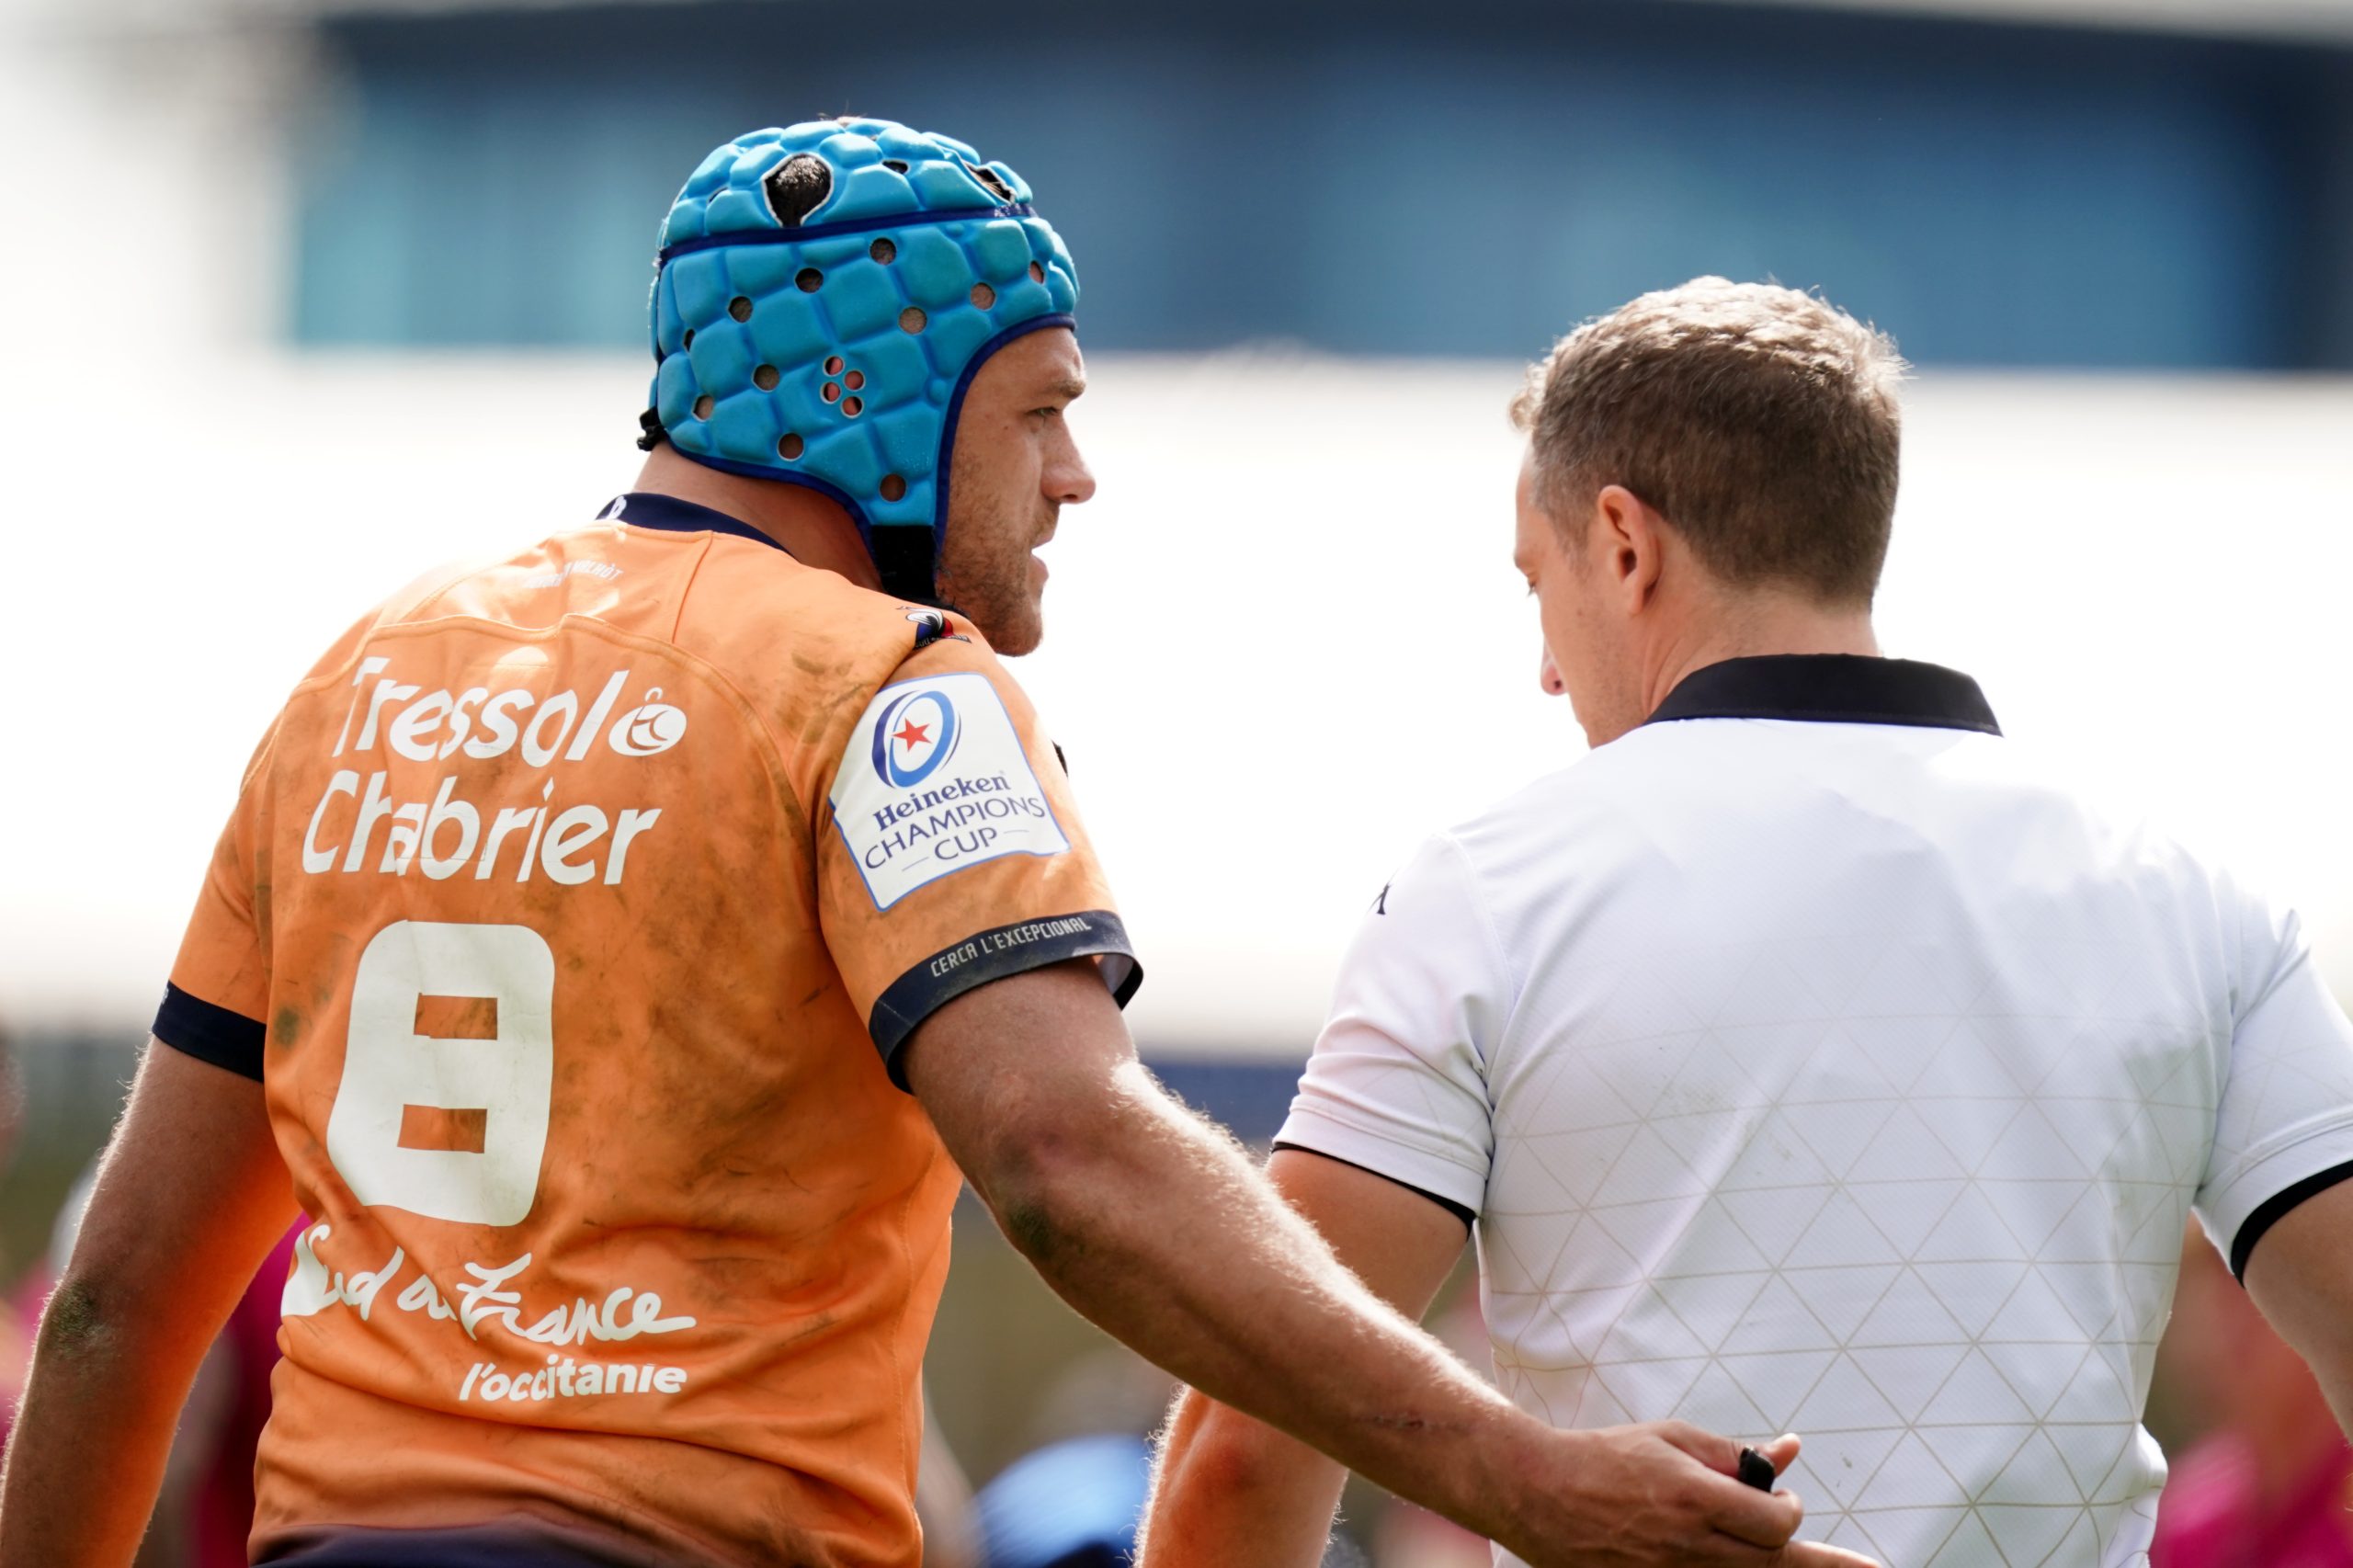 Referees confirmed for Champions Cup and Challenge Cup Rounds 4 & 5